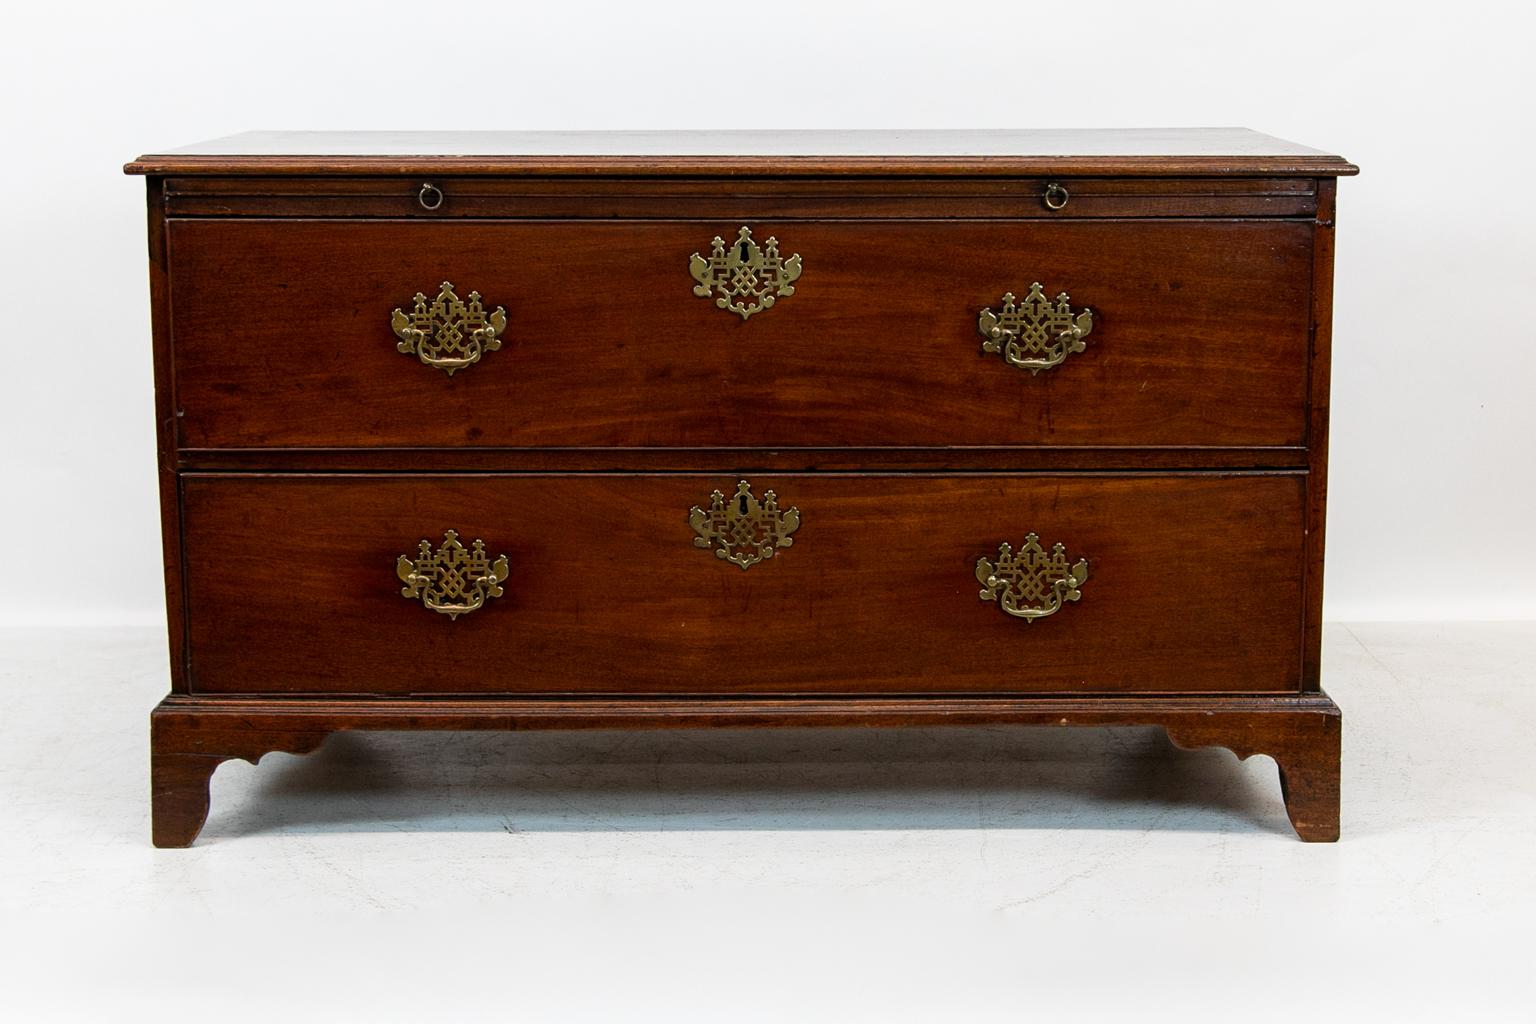 English mahogany two-drawer chest, has a brushing slide, open fretwork brass pulls and escutcheons. There are a significant number of dark stain marks on the top patina.
  